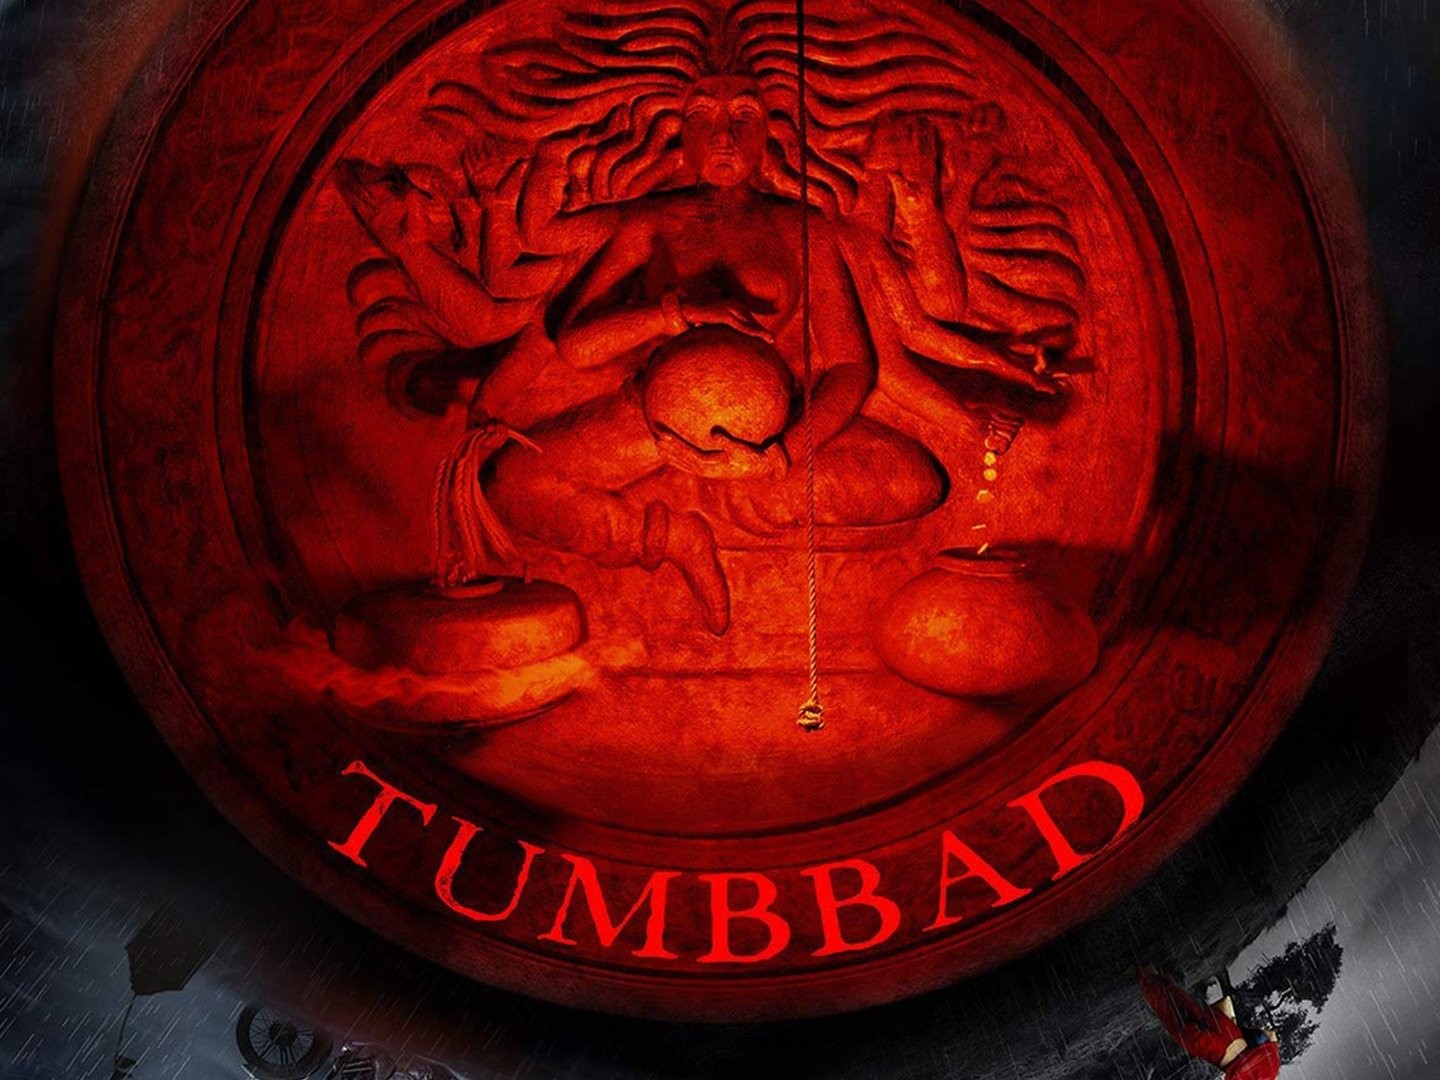 Good Hope PlexiGlass Tumbbad Movie Framed Poster, Multicolour, Print,  10inch x 13inch for Room Office Wall : Amazon.sg: Home